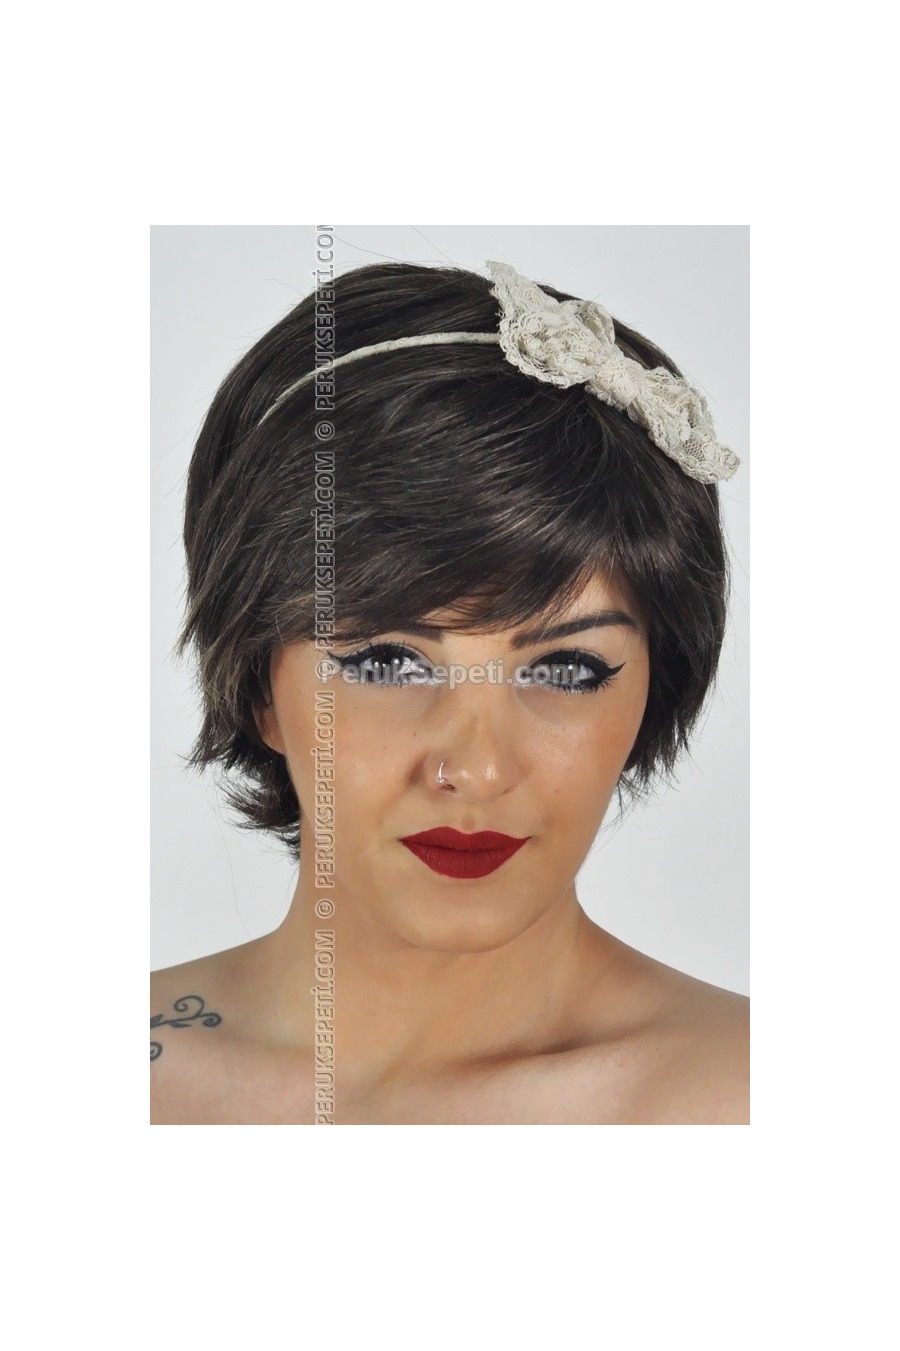 Black Short Wig with White Shade